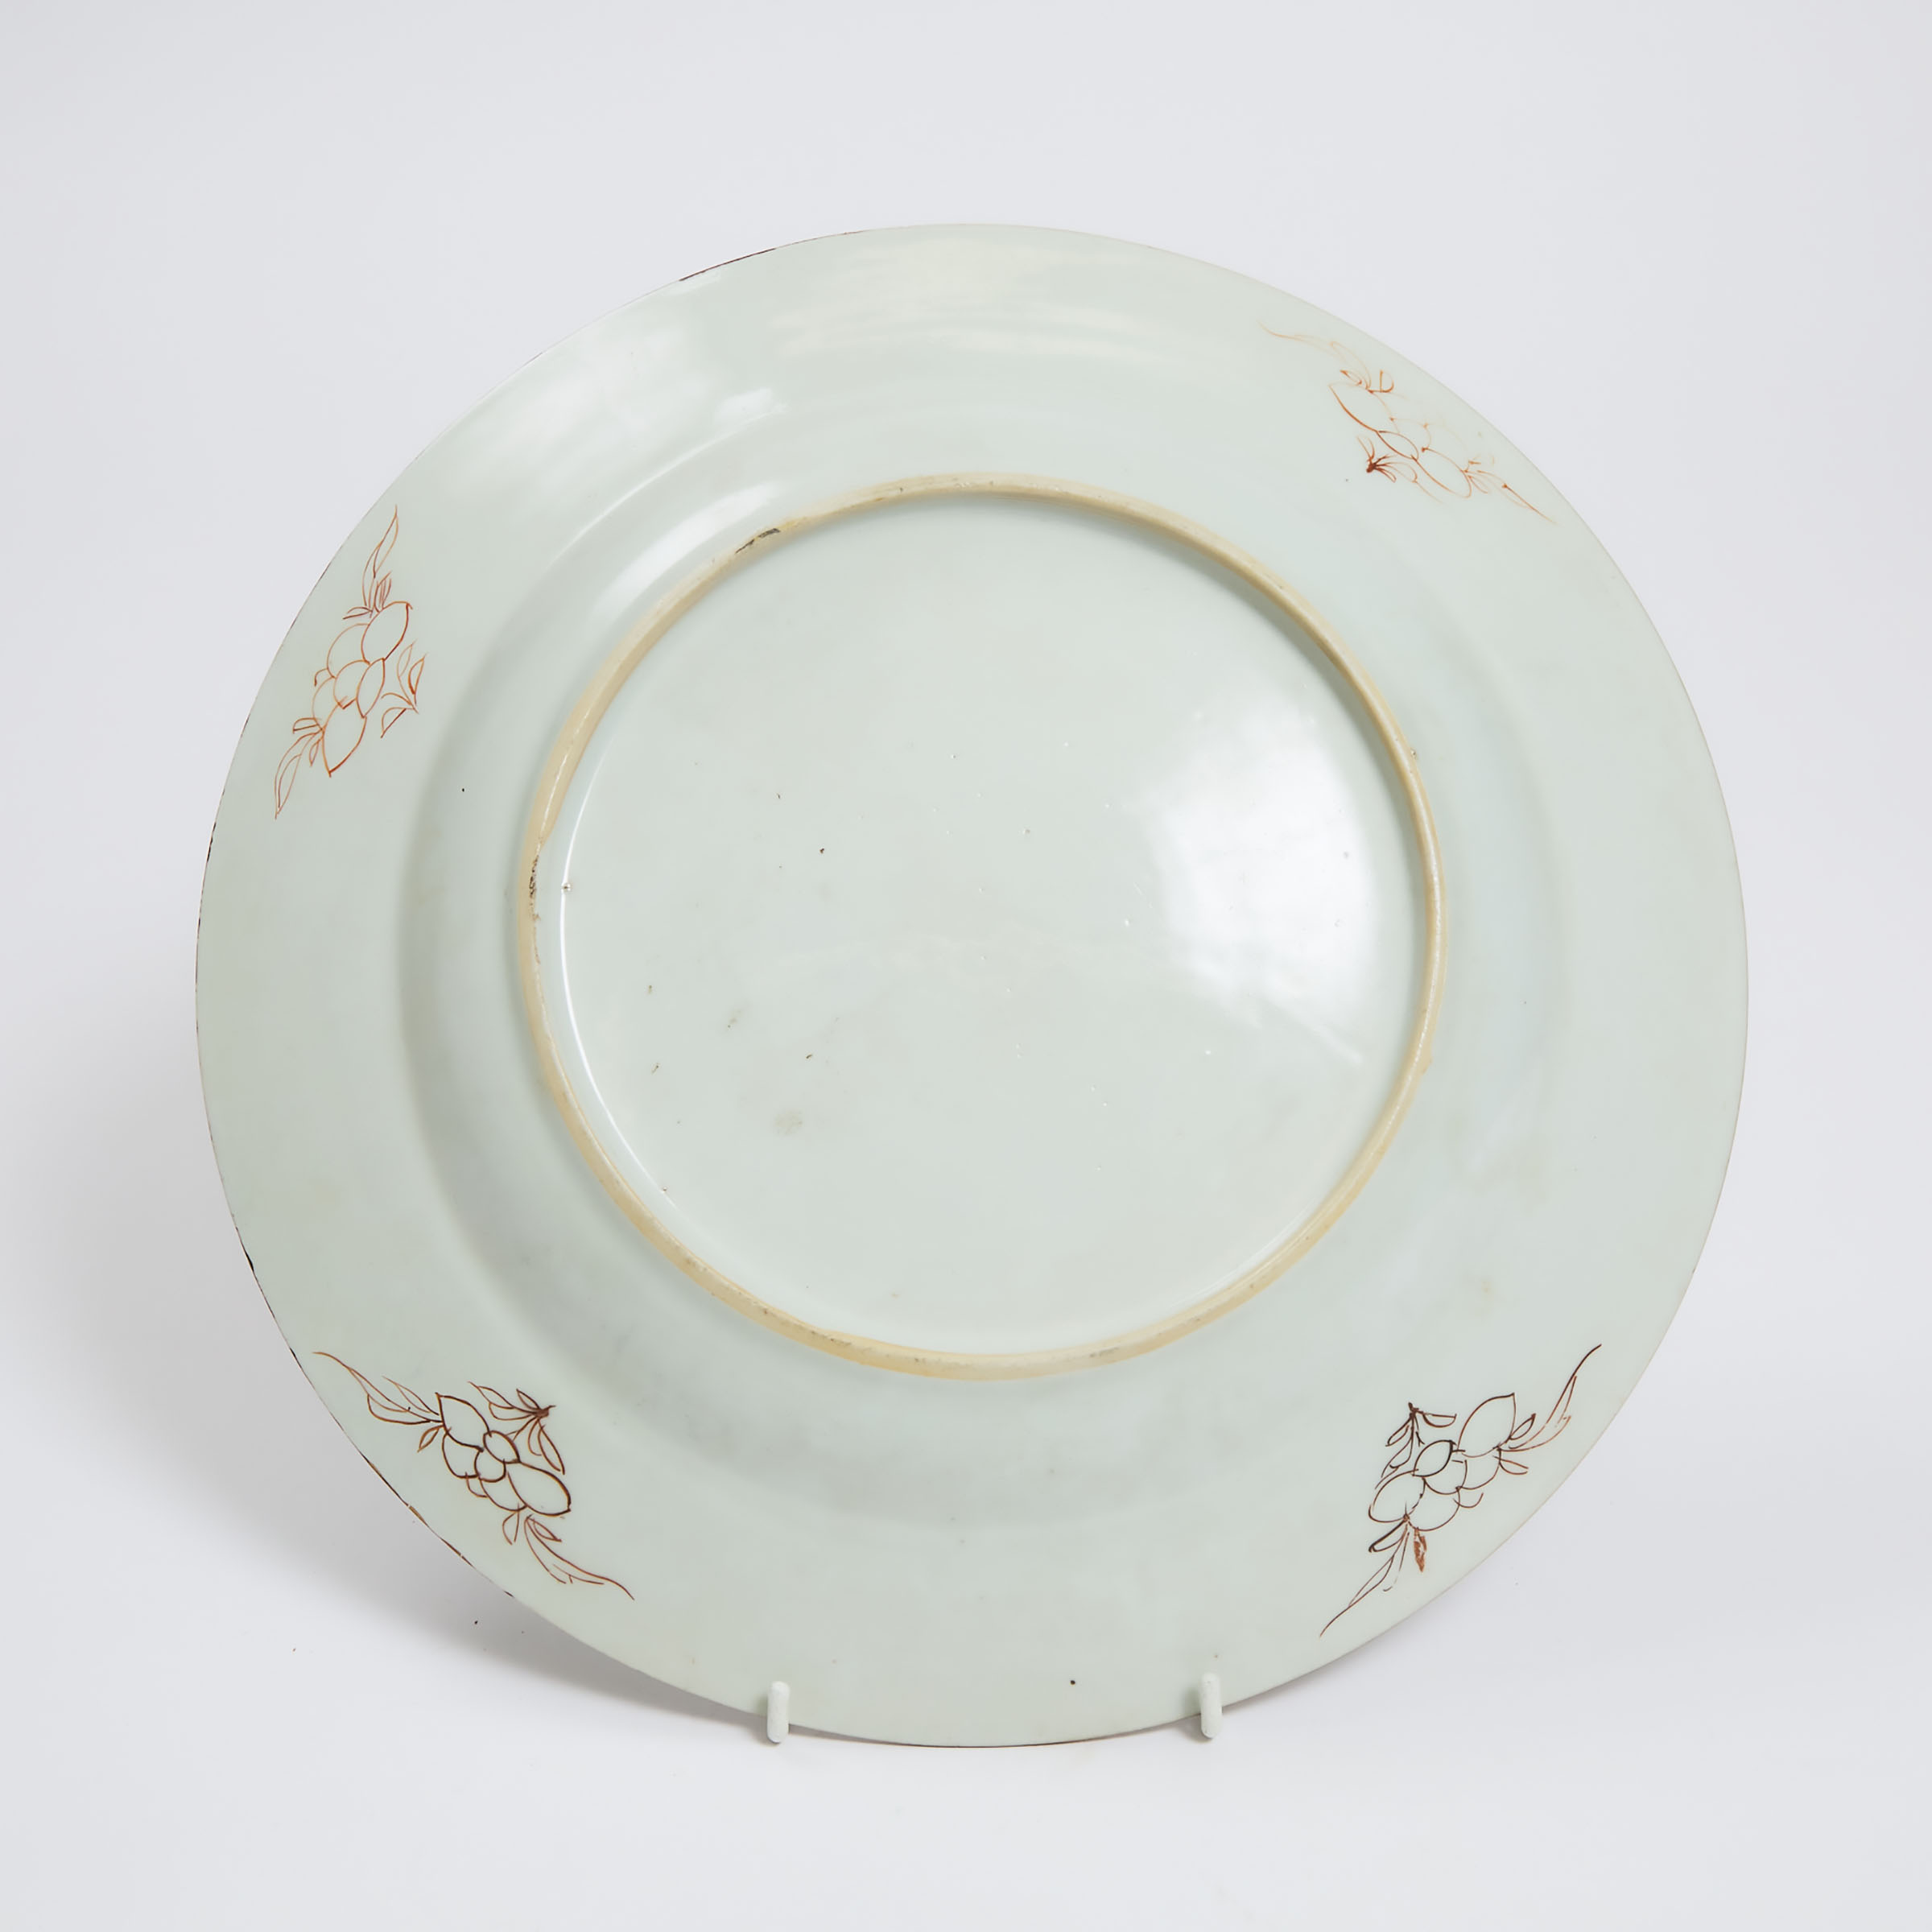 A Chinese Export Famille Rose Plate, Yongzheng Period, 18th Century